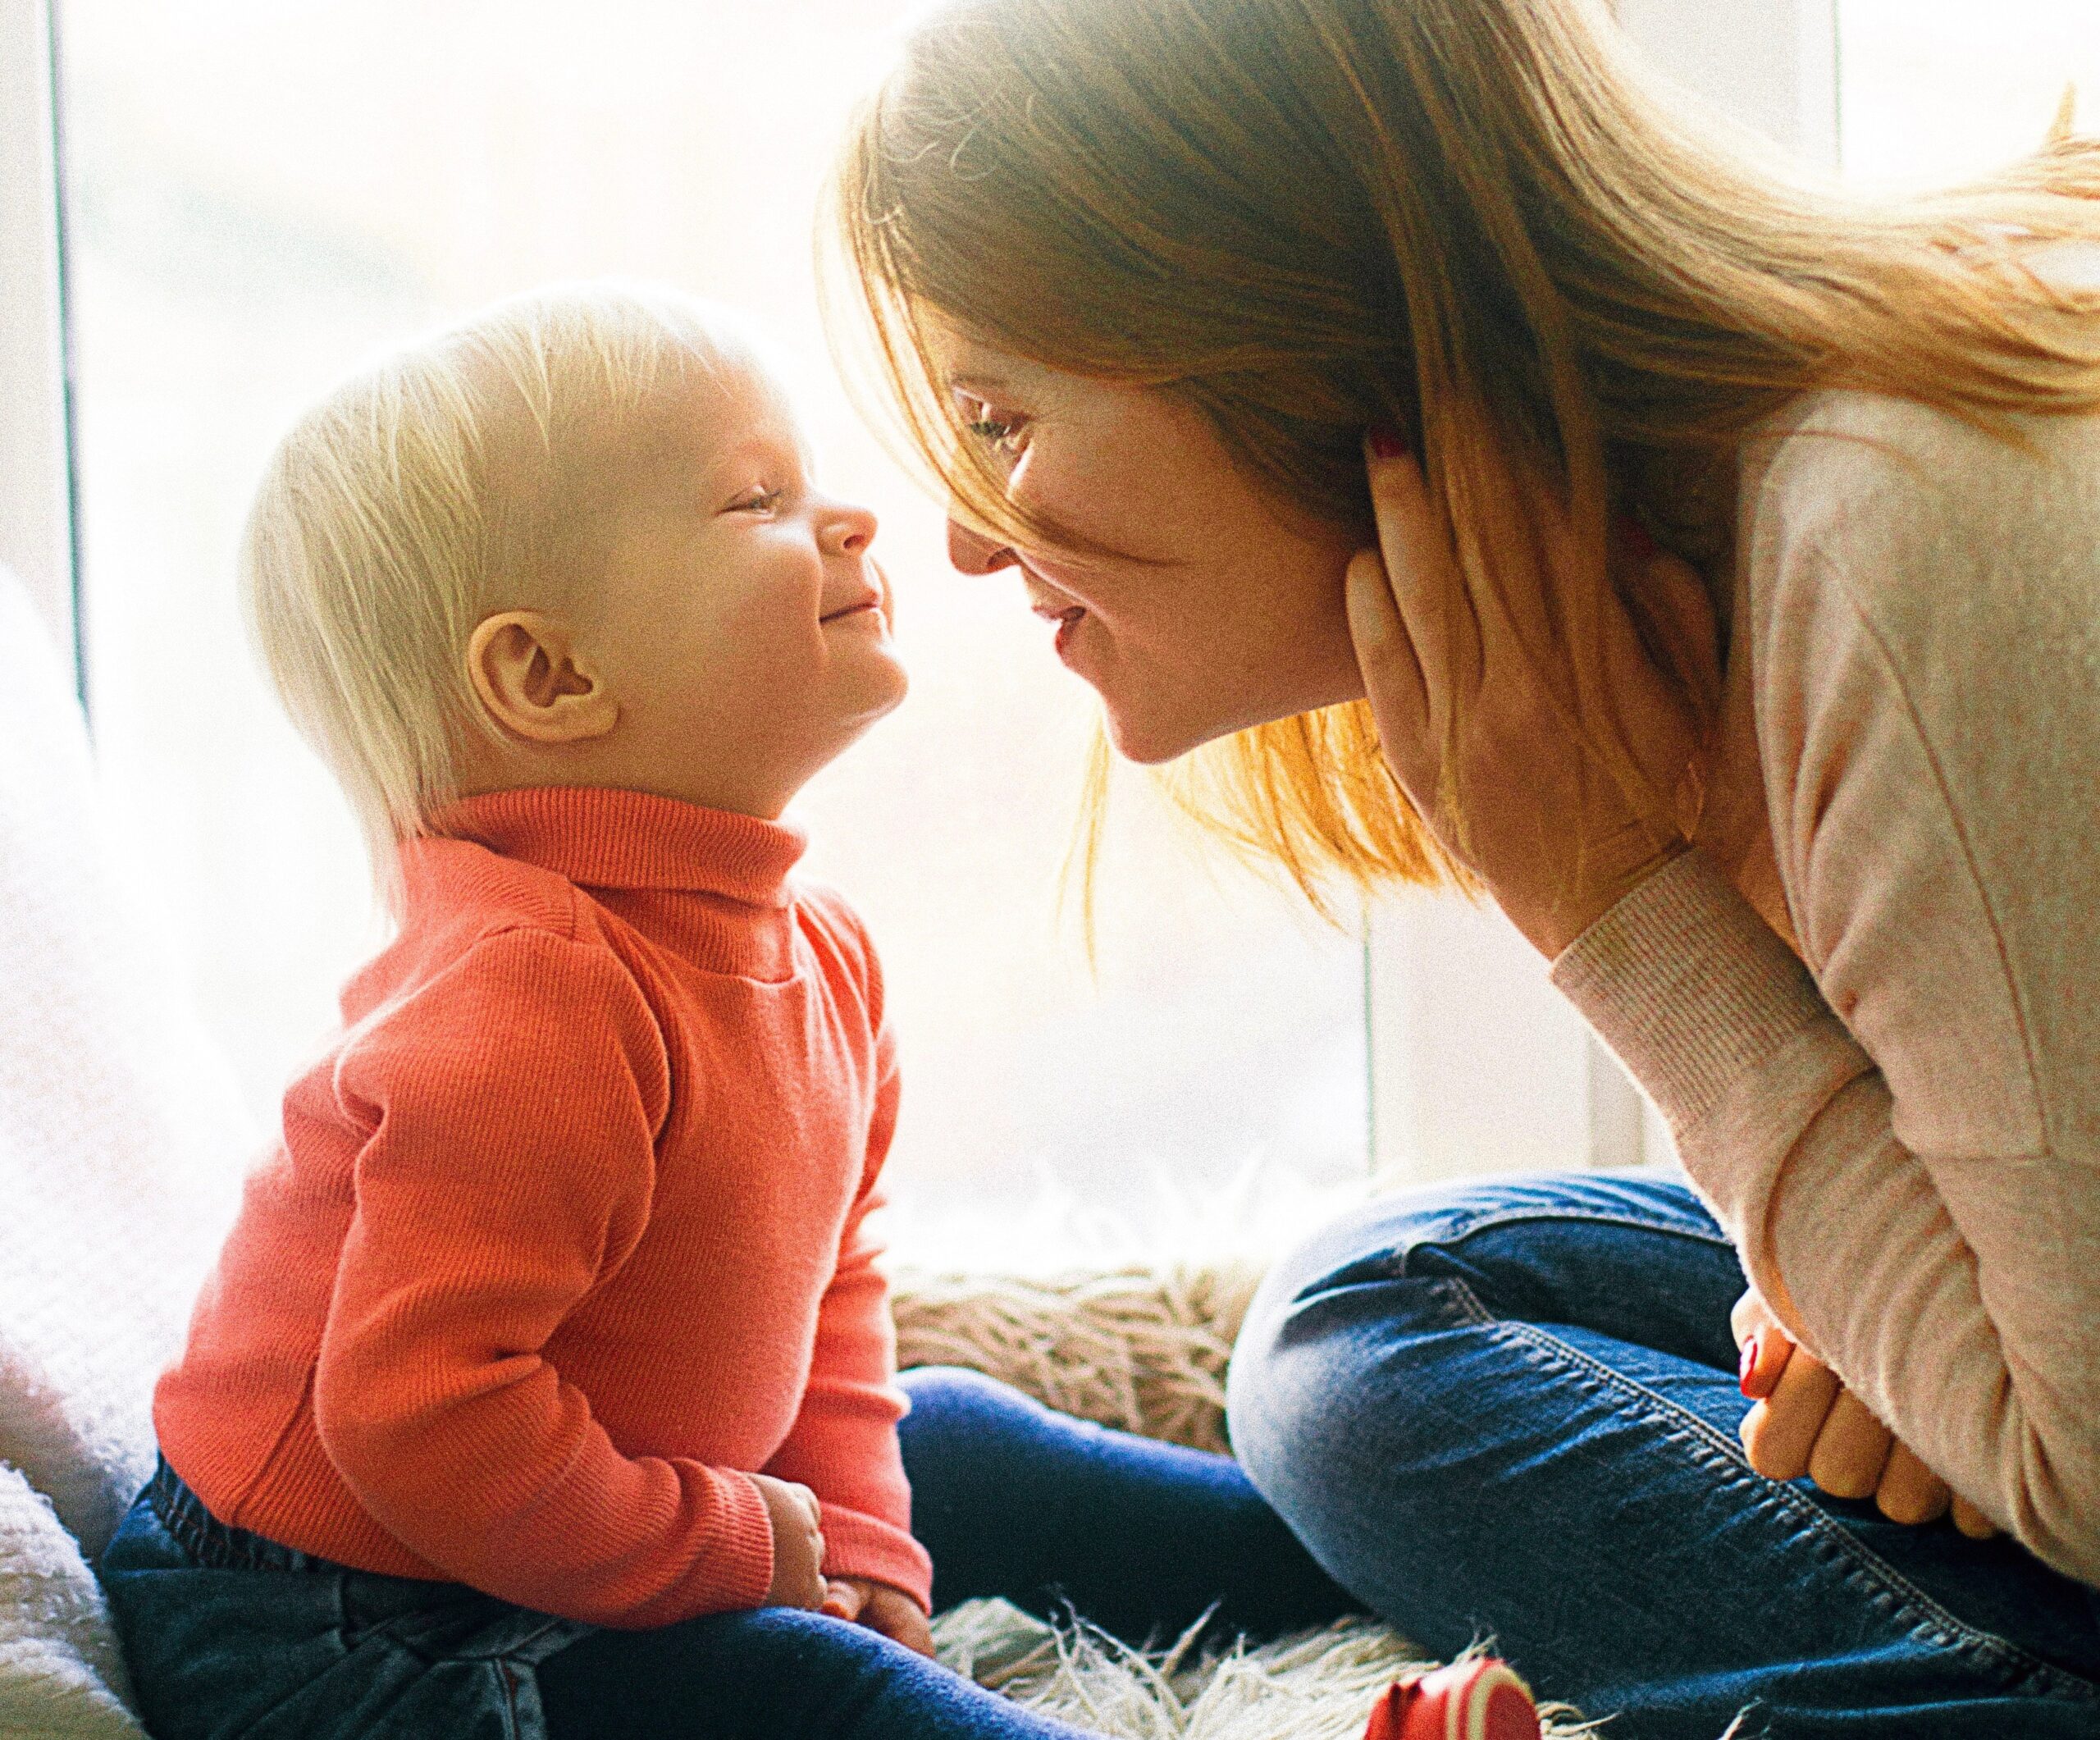 woman and child sitting on fur covered bed in front of window nose to nose with smiles